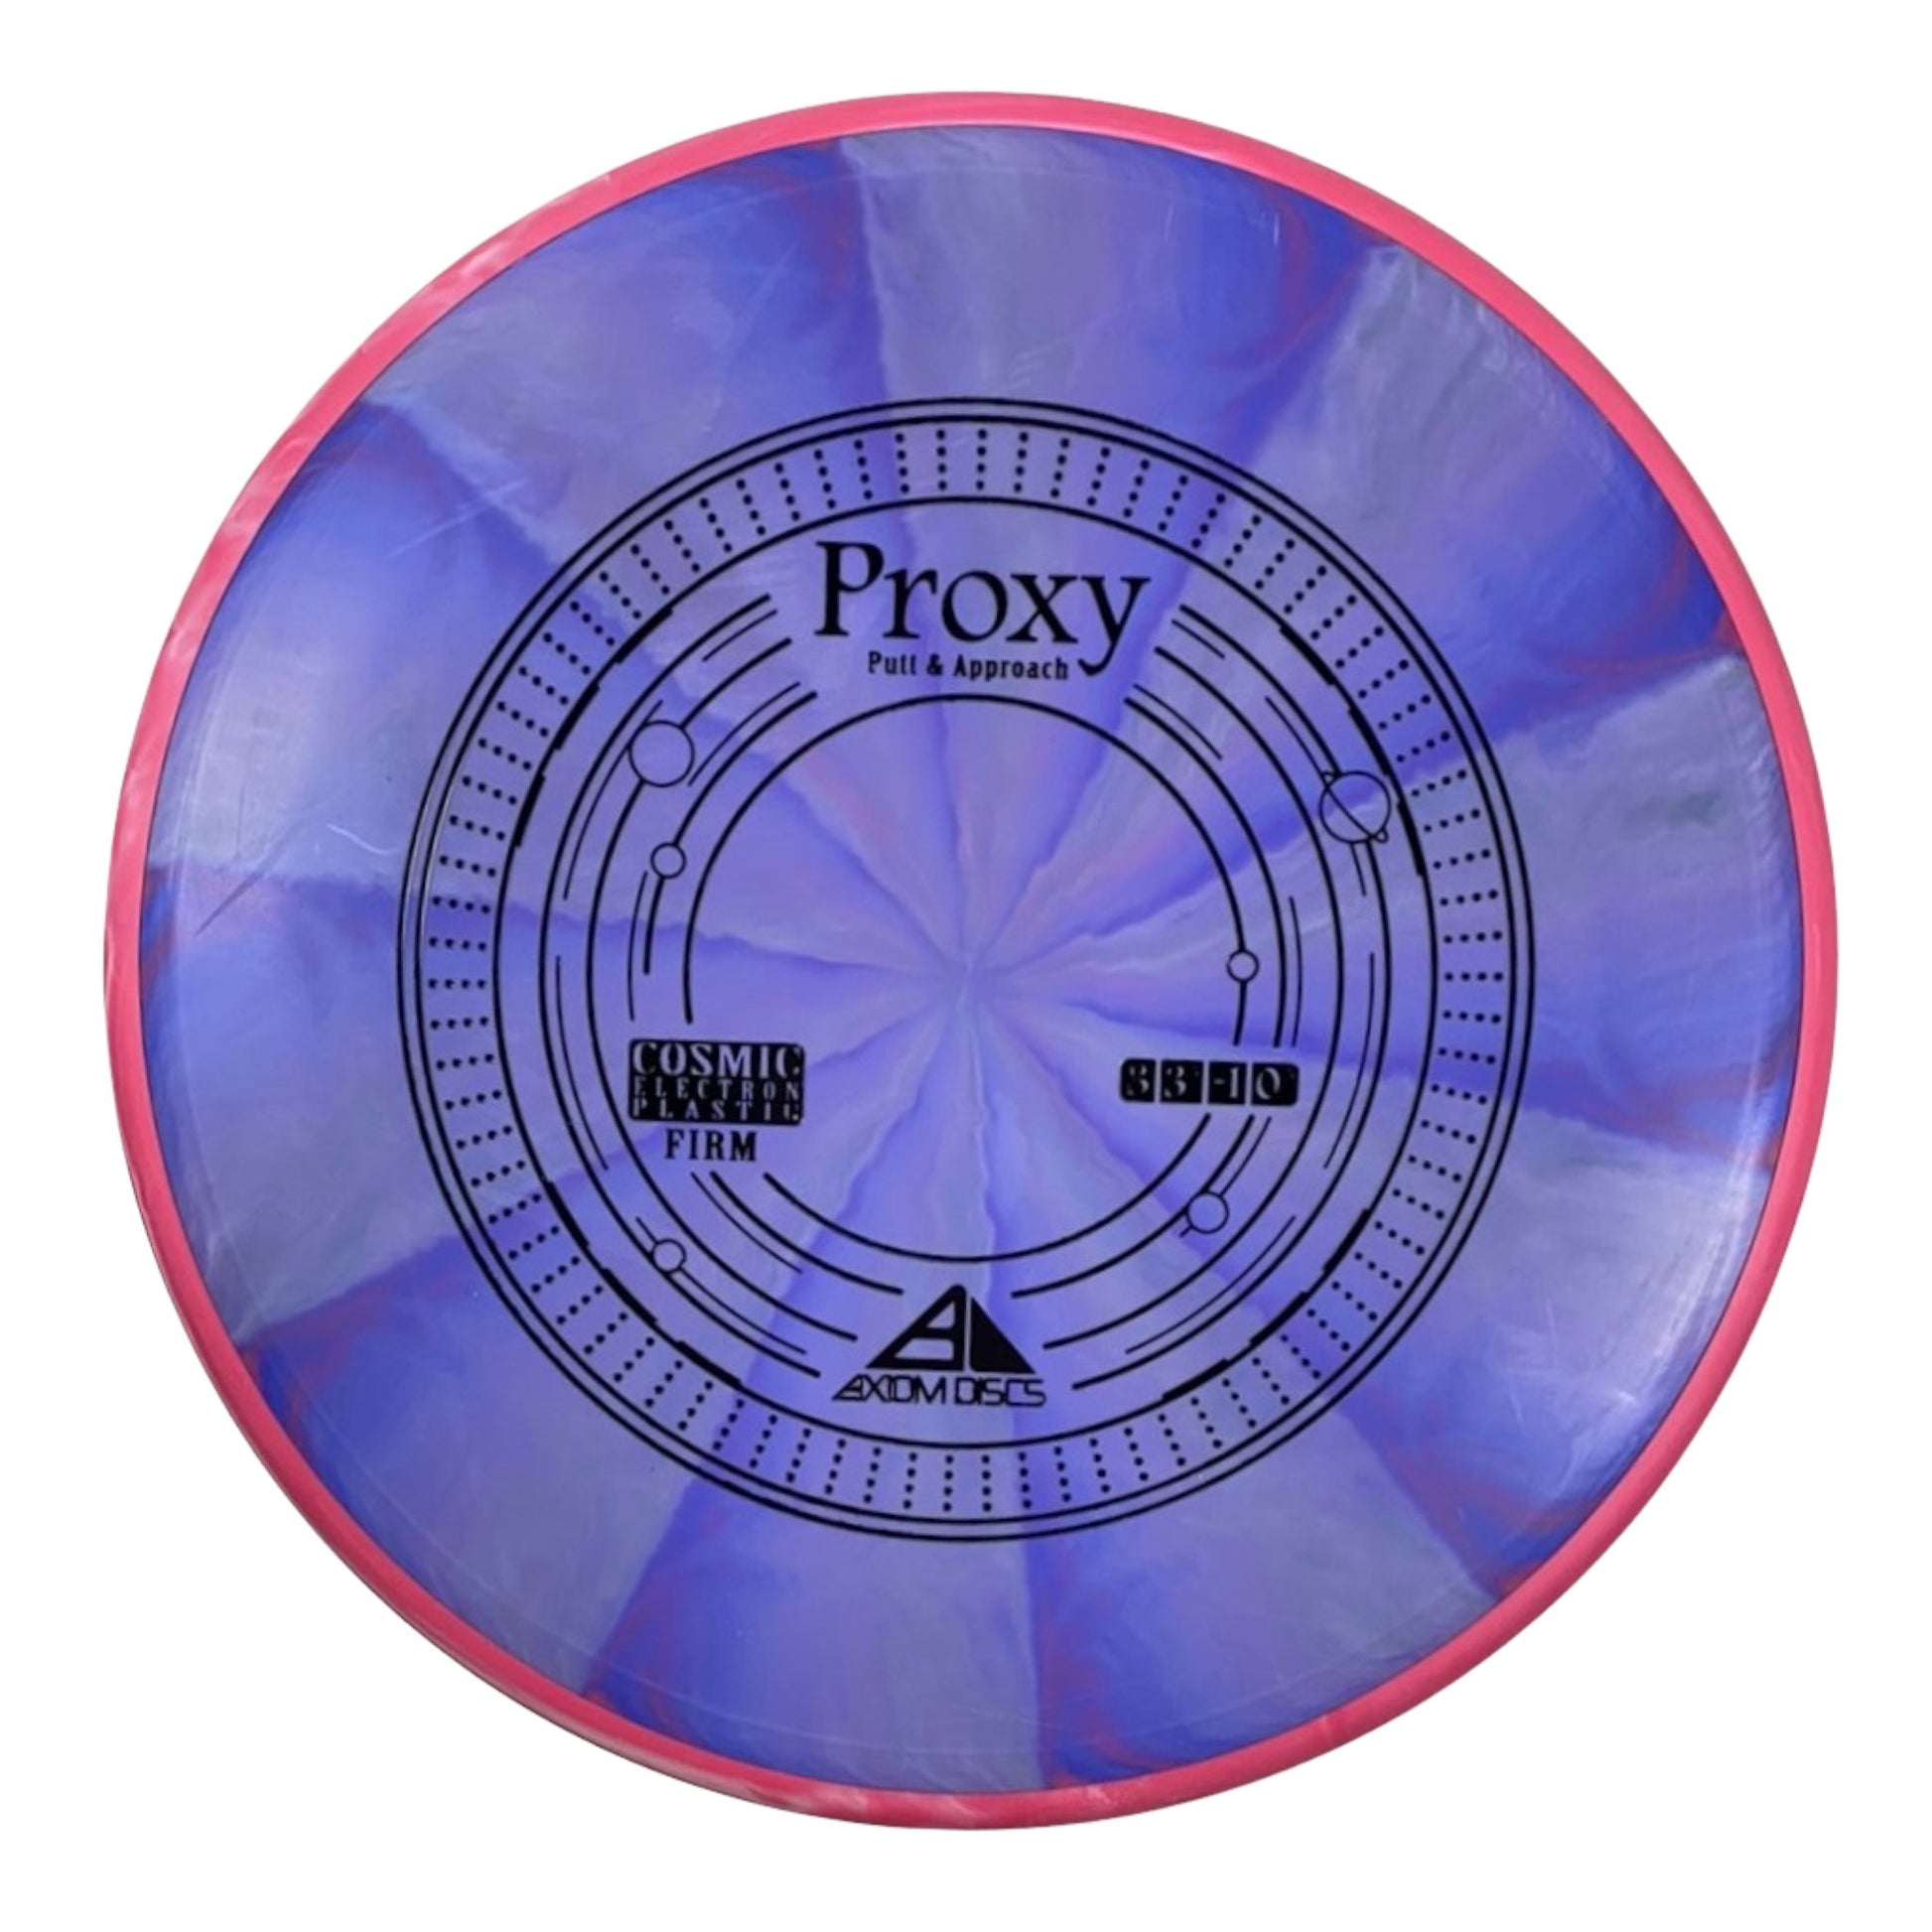 Axiom Discs Proxy | Cosmic Electron Firm | Blue/Pink 172g Disc Golf